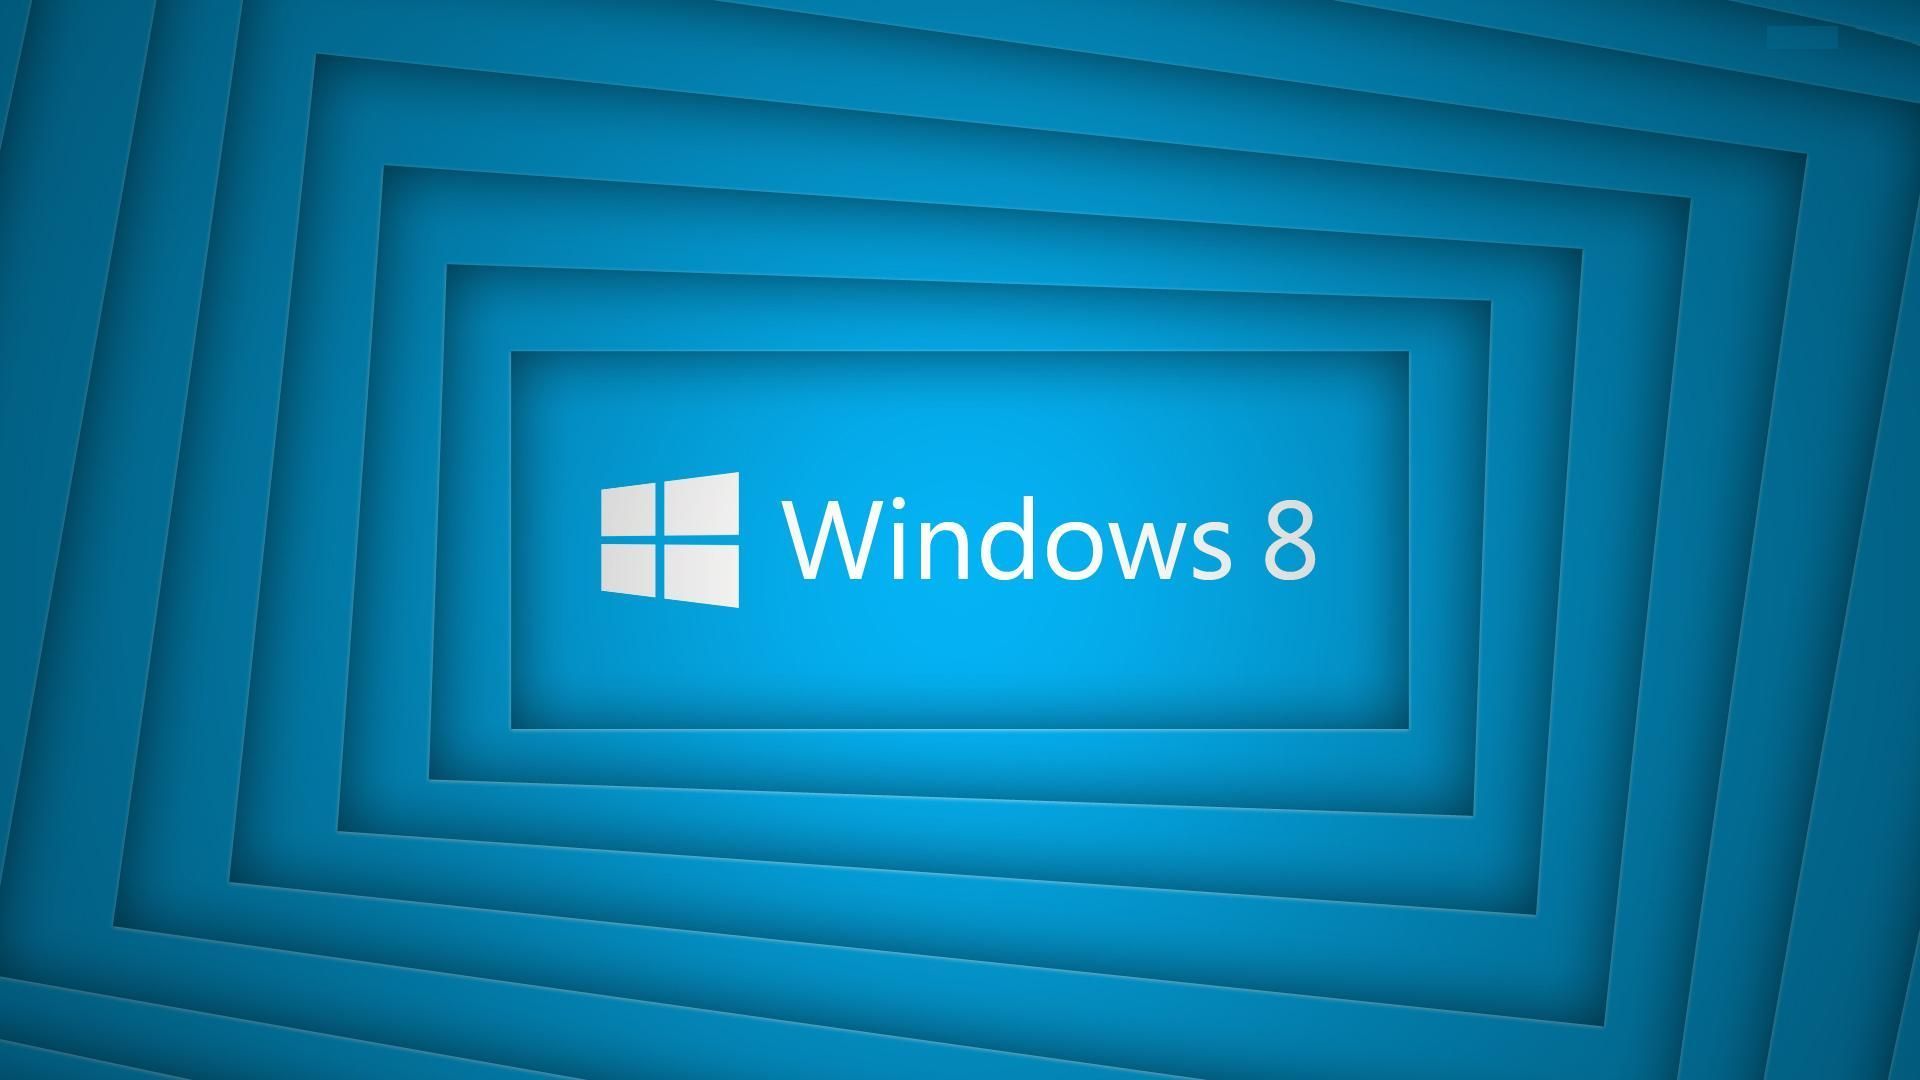 Windows 8 HD Wallpapers | Windows 8 Images Free | Cool Wallpapers